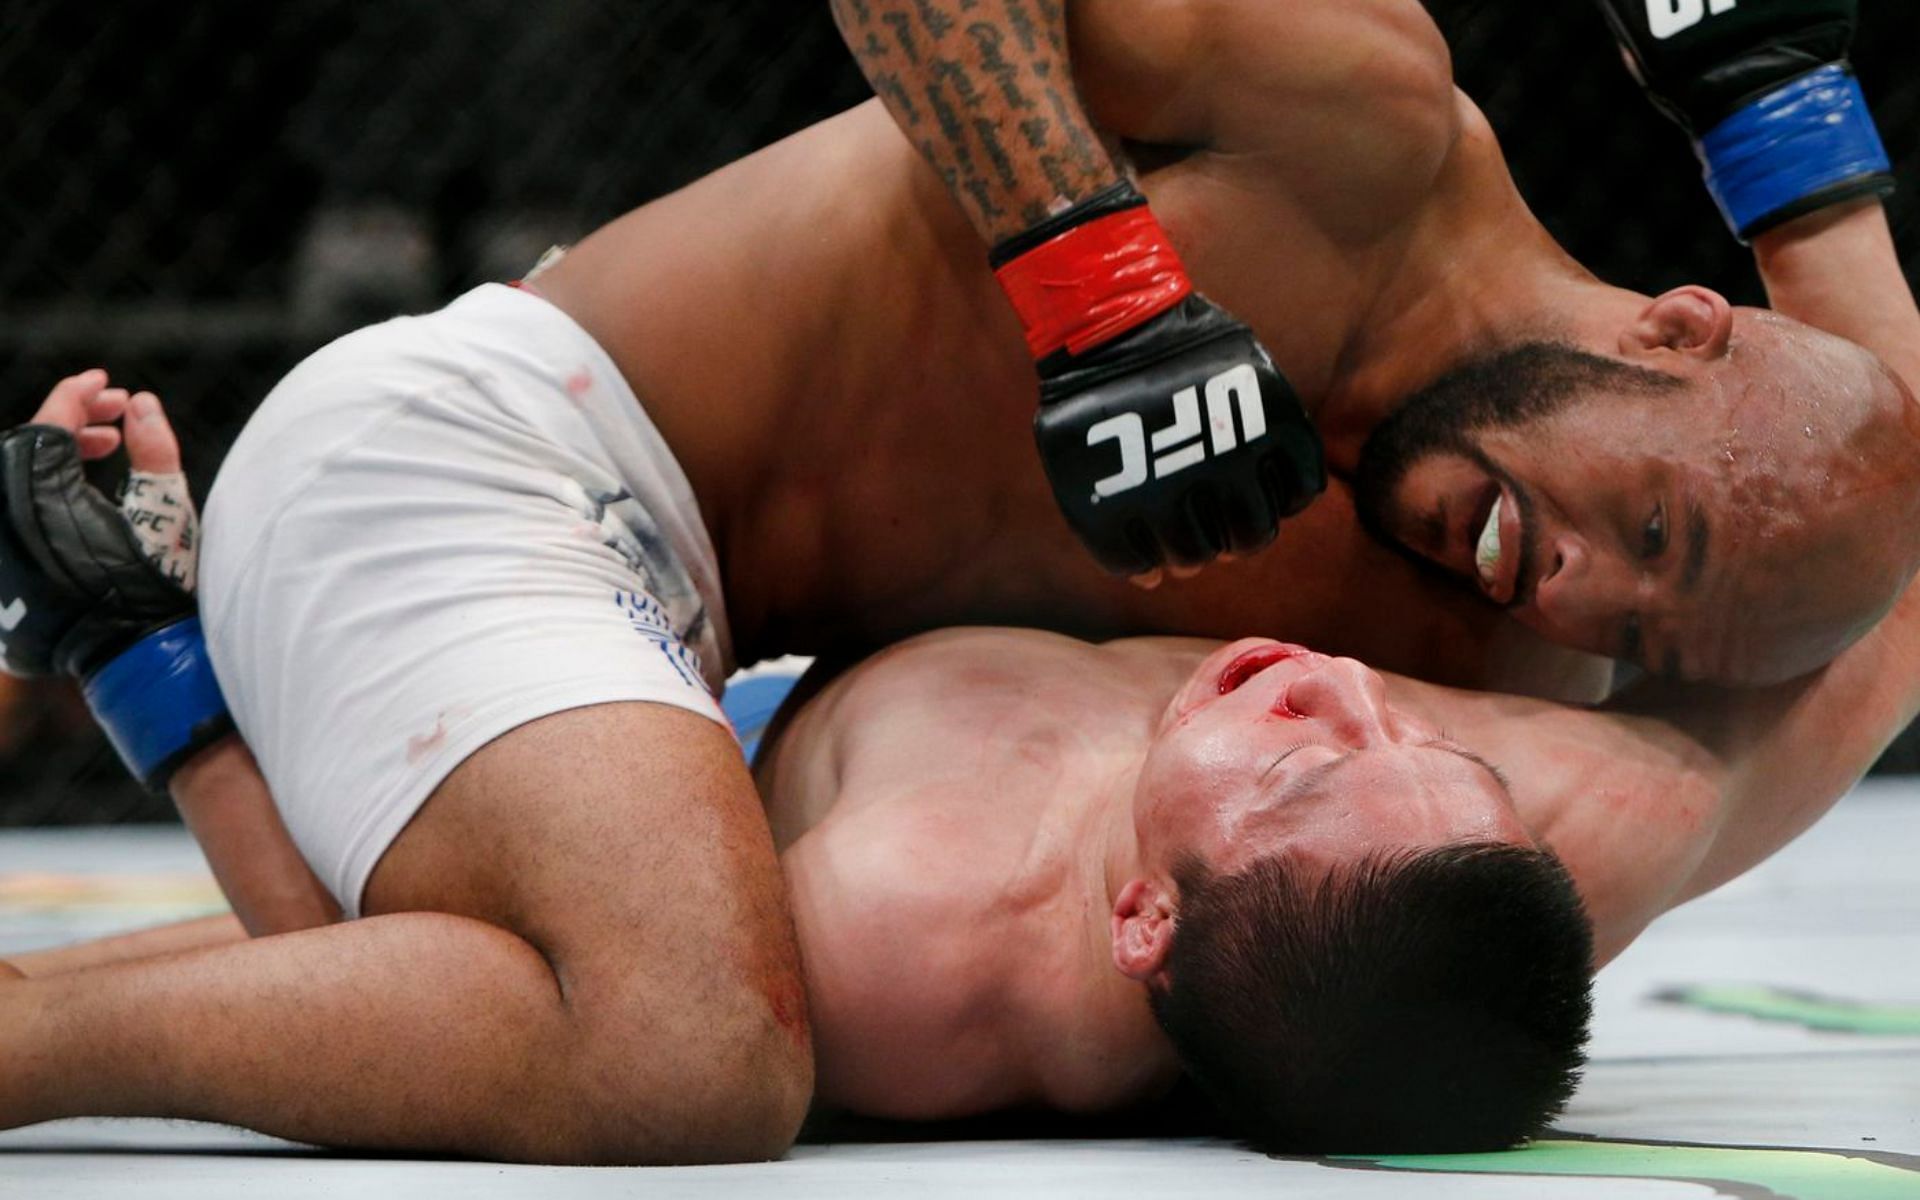 Demetrious Johnson submitted Kyoji Horiguchi in the very last second of their flyweight title fight